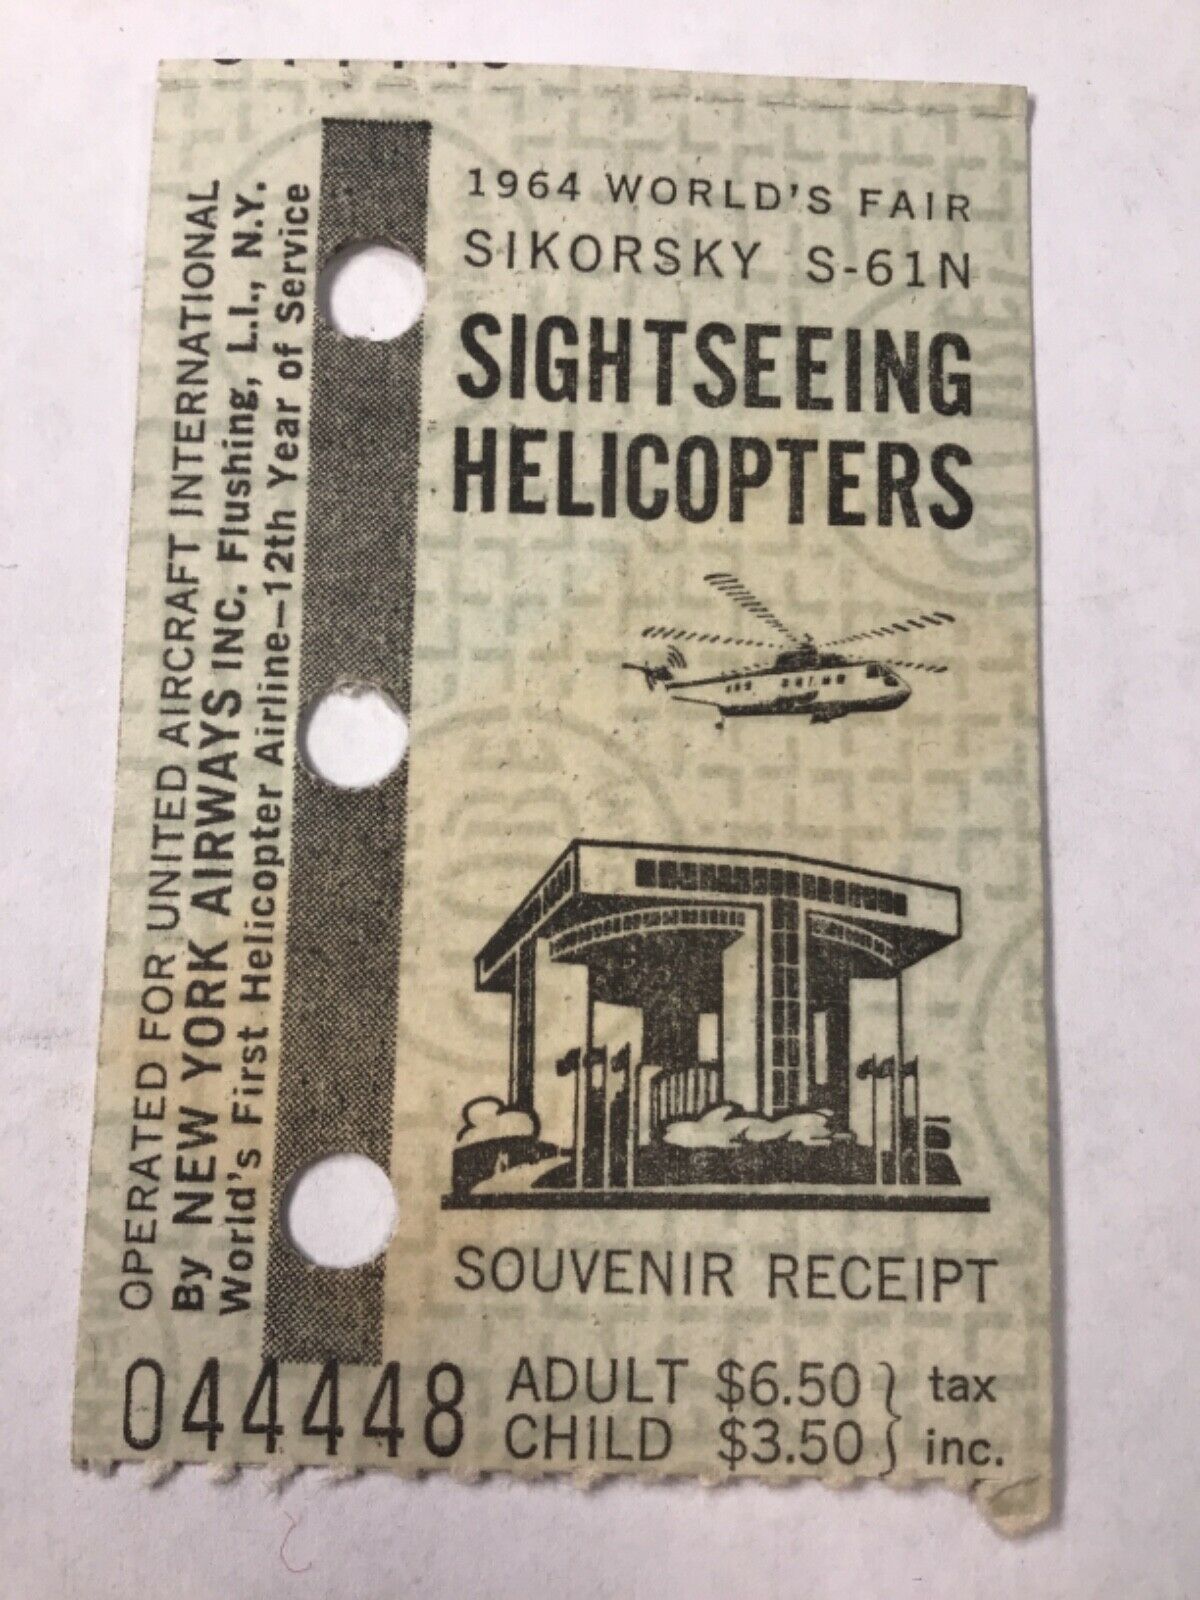 Vintage 1964 Worlds Fair Sightseeing Helicopter Tour Ticket